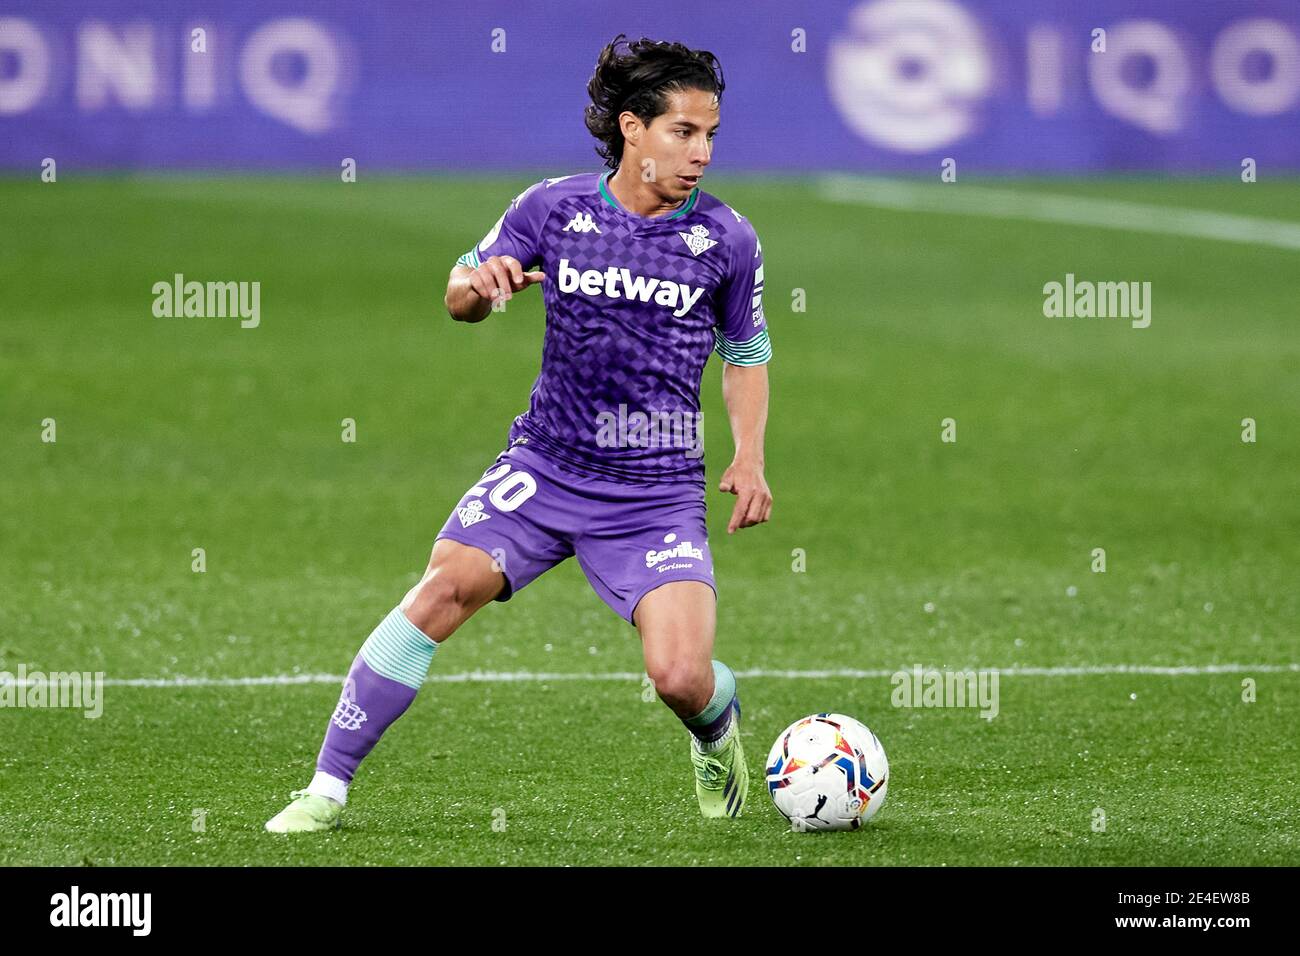 San Sebastian, Spain. 23 January, 2021. Diego Lainez of Real Betis Balompie  in action during the La Liga match between Real Sociedad CF and Real Betis  Balompie played at Reale Arena. Credit: